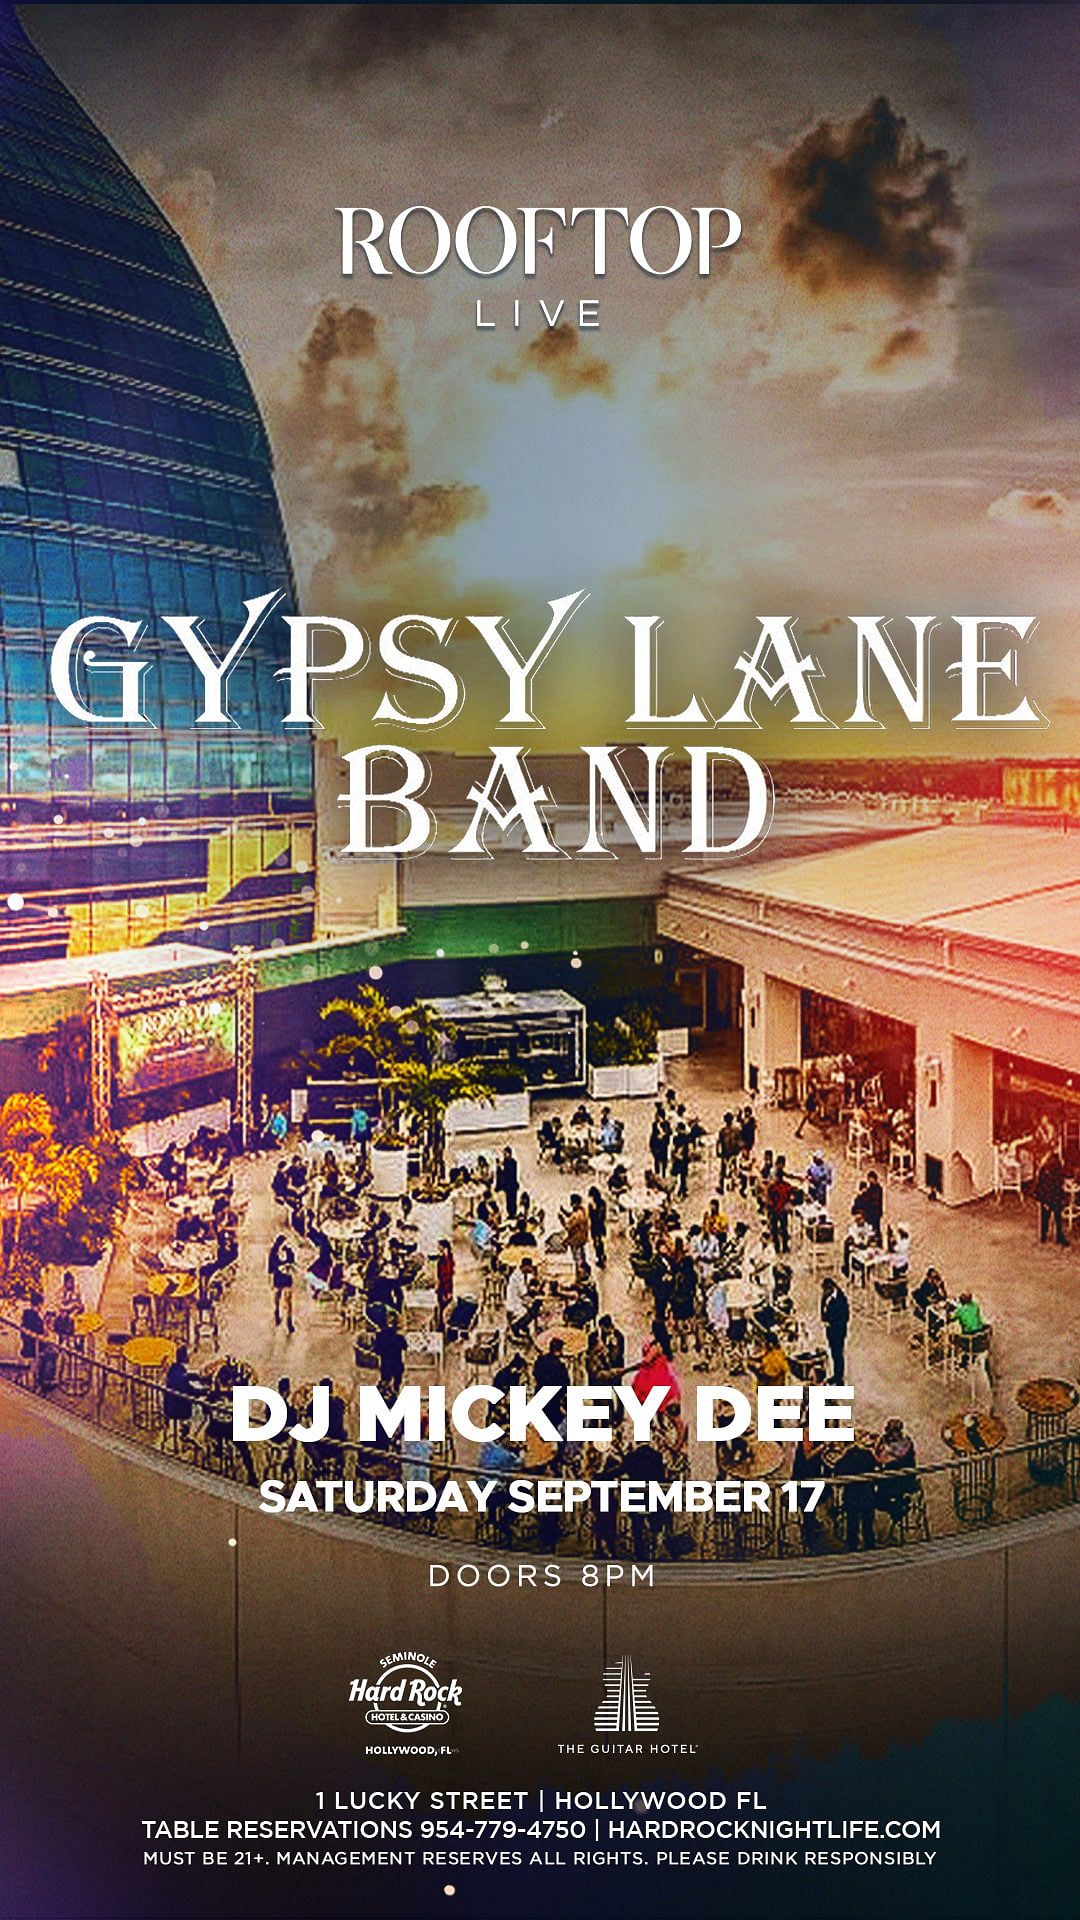 Gypsy Lane Band Rooftop Live Hardrock Holly Tickets at Rooftop Live